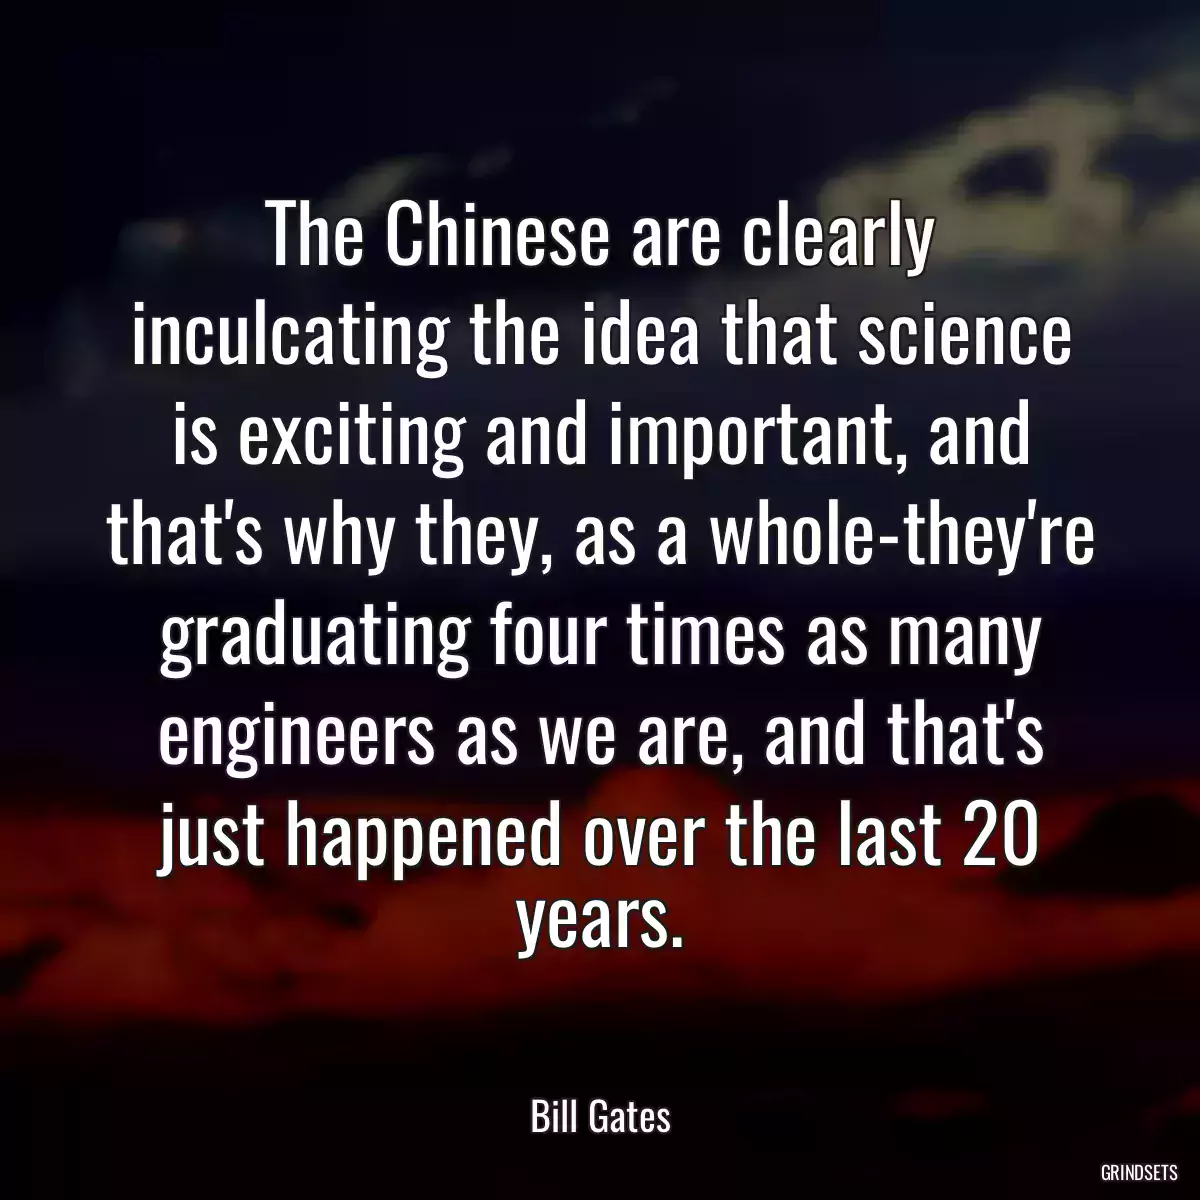 The Chinese are clearly inculcating the idea that science is exciting and important, and that\'s why they, as a whole-they\'re graduating four times as many engineers as we are, and that\'s just happened over the last 20 years.